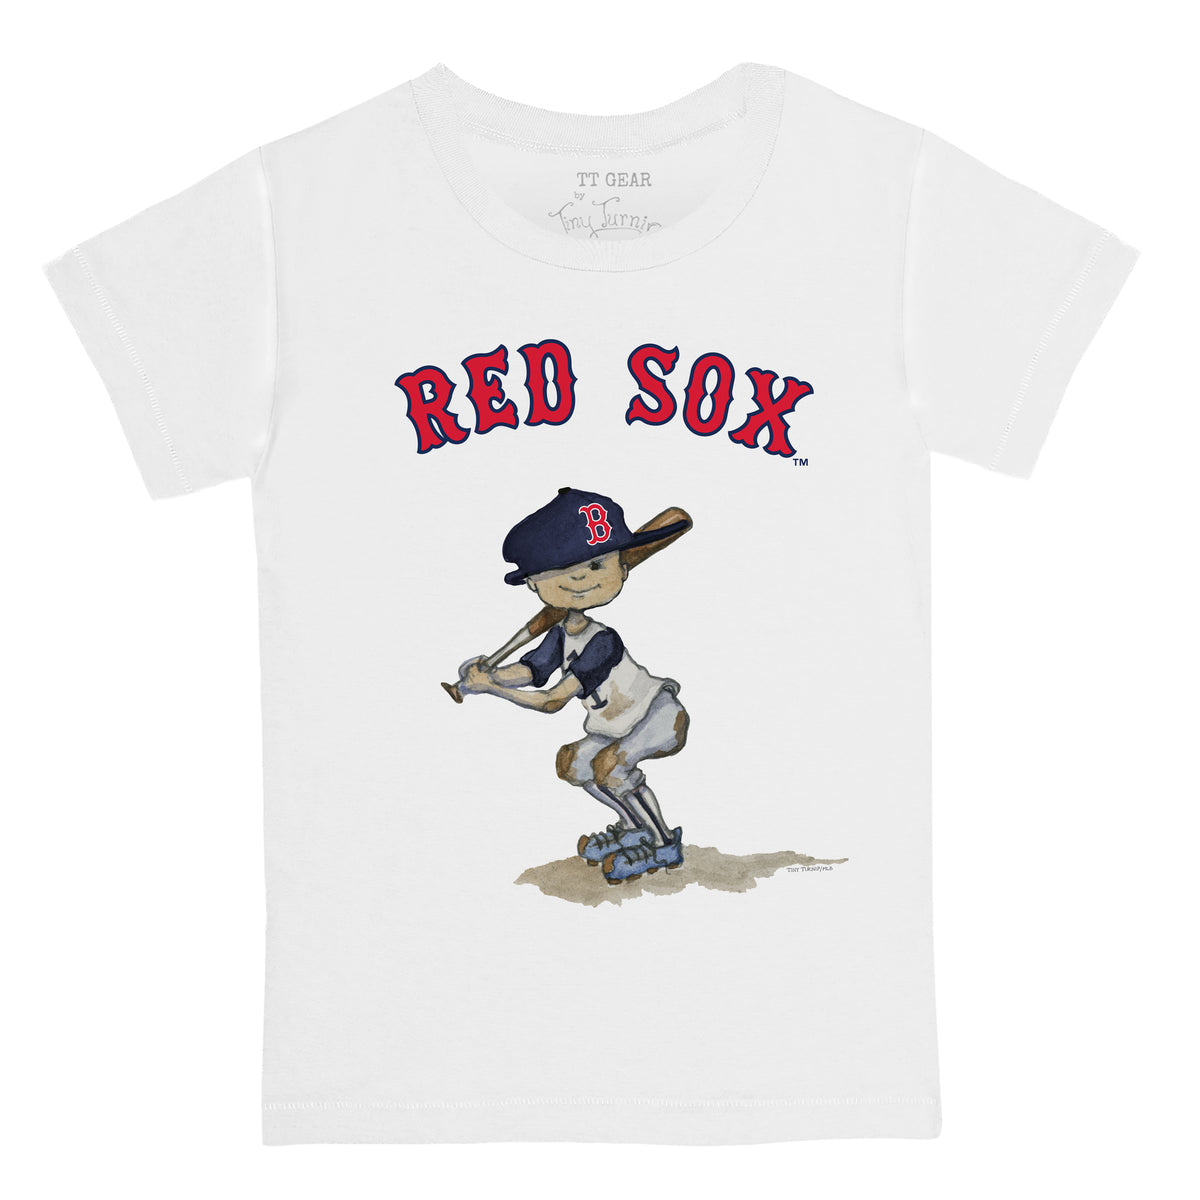 Boston Red Sox Apparel, Red Sox Jersey, Red Sox Clothing and Gear